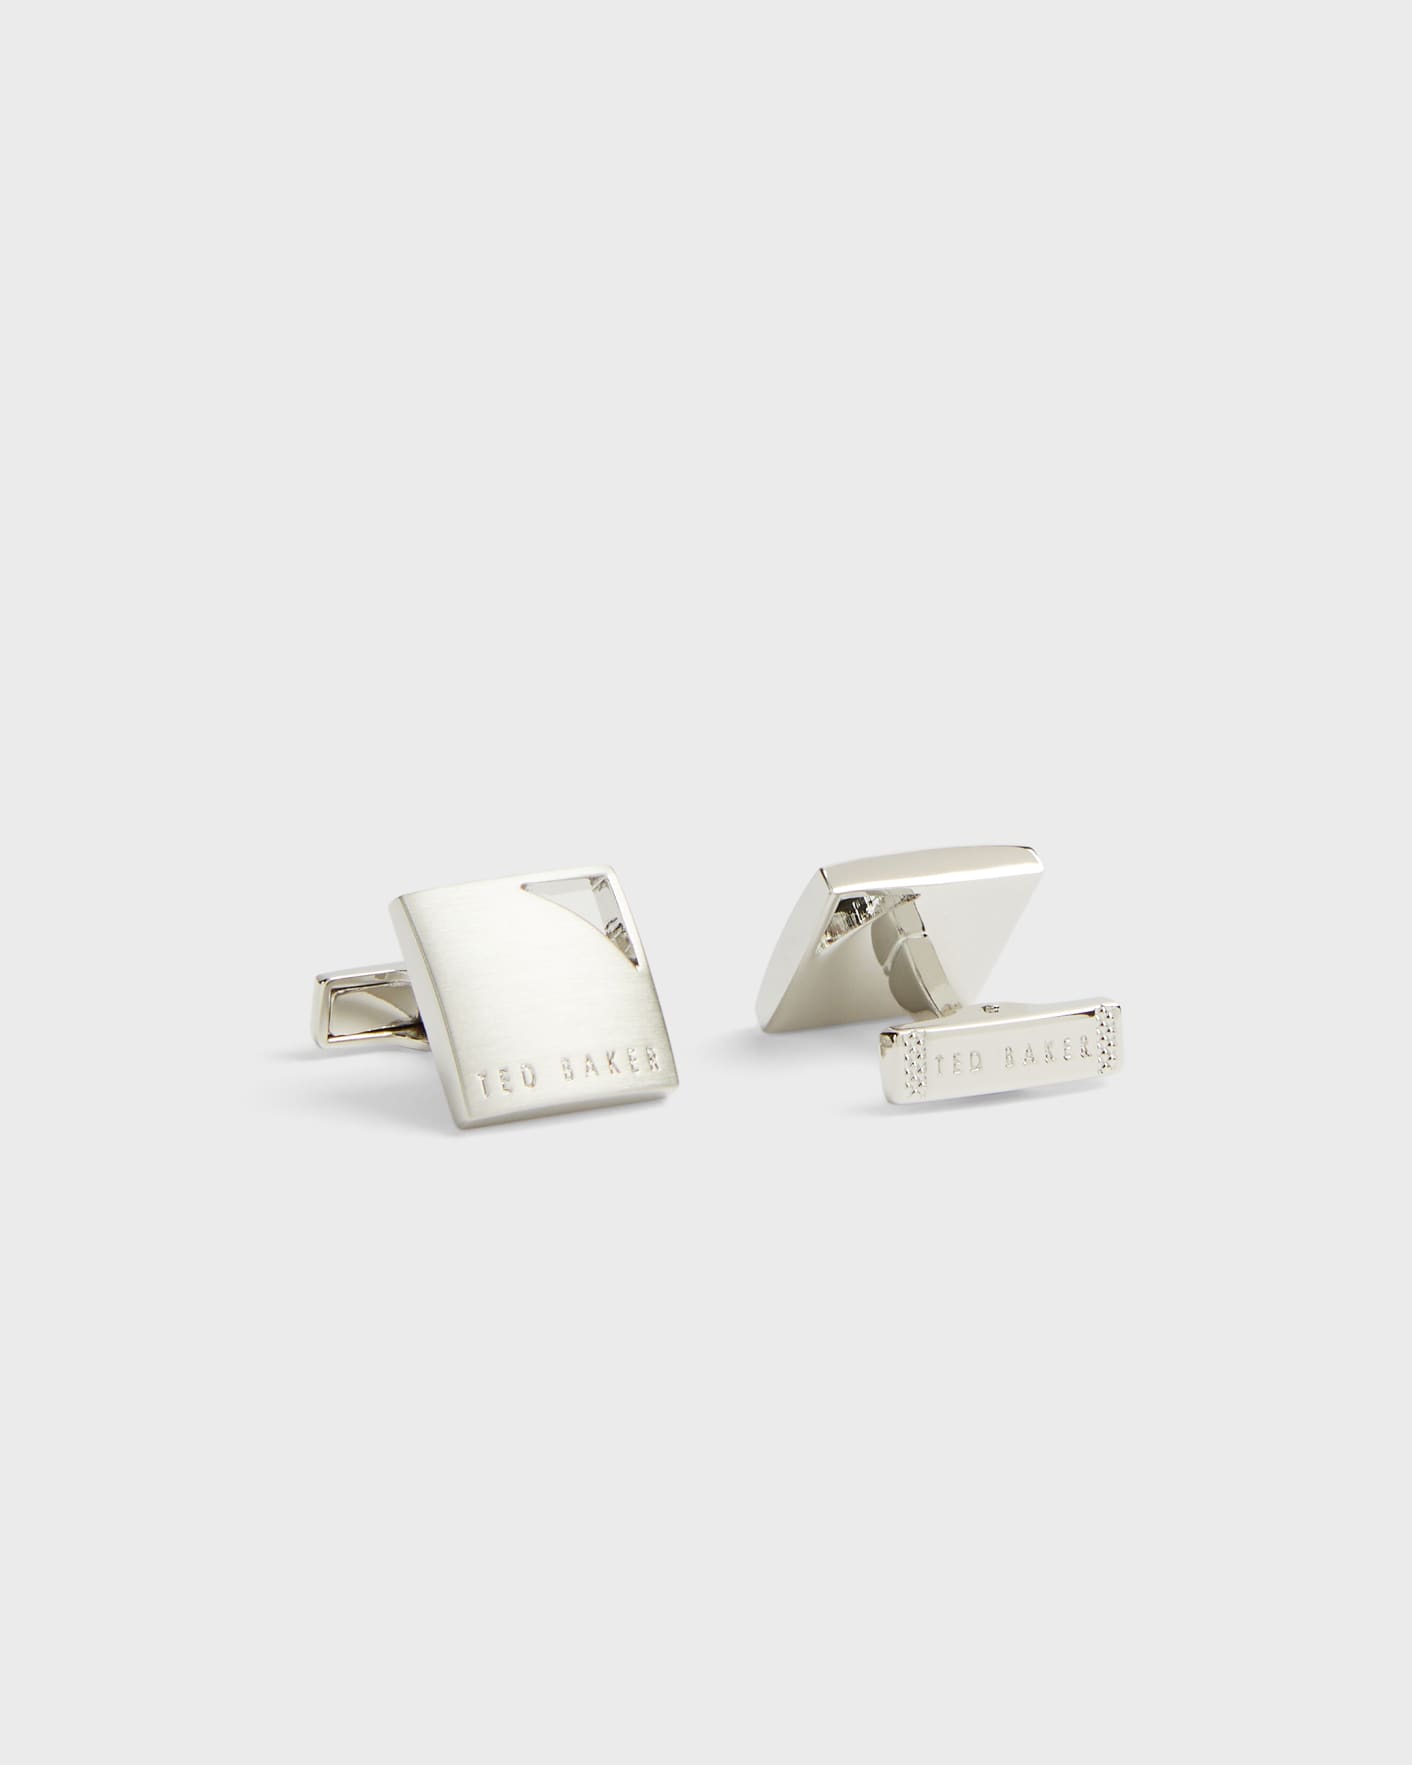 Silver Color Square Cufflinks with Corner Cut Out Ted Baker